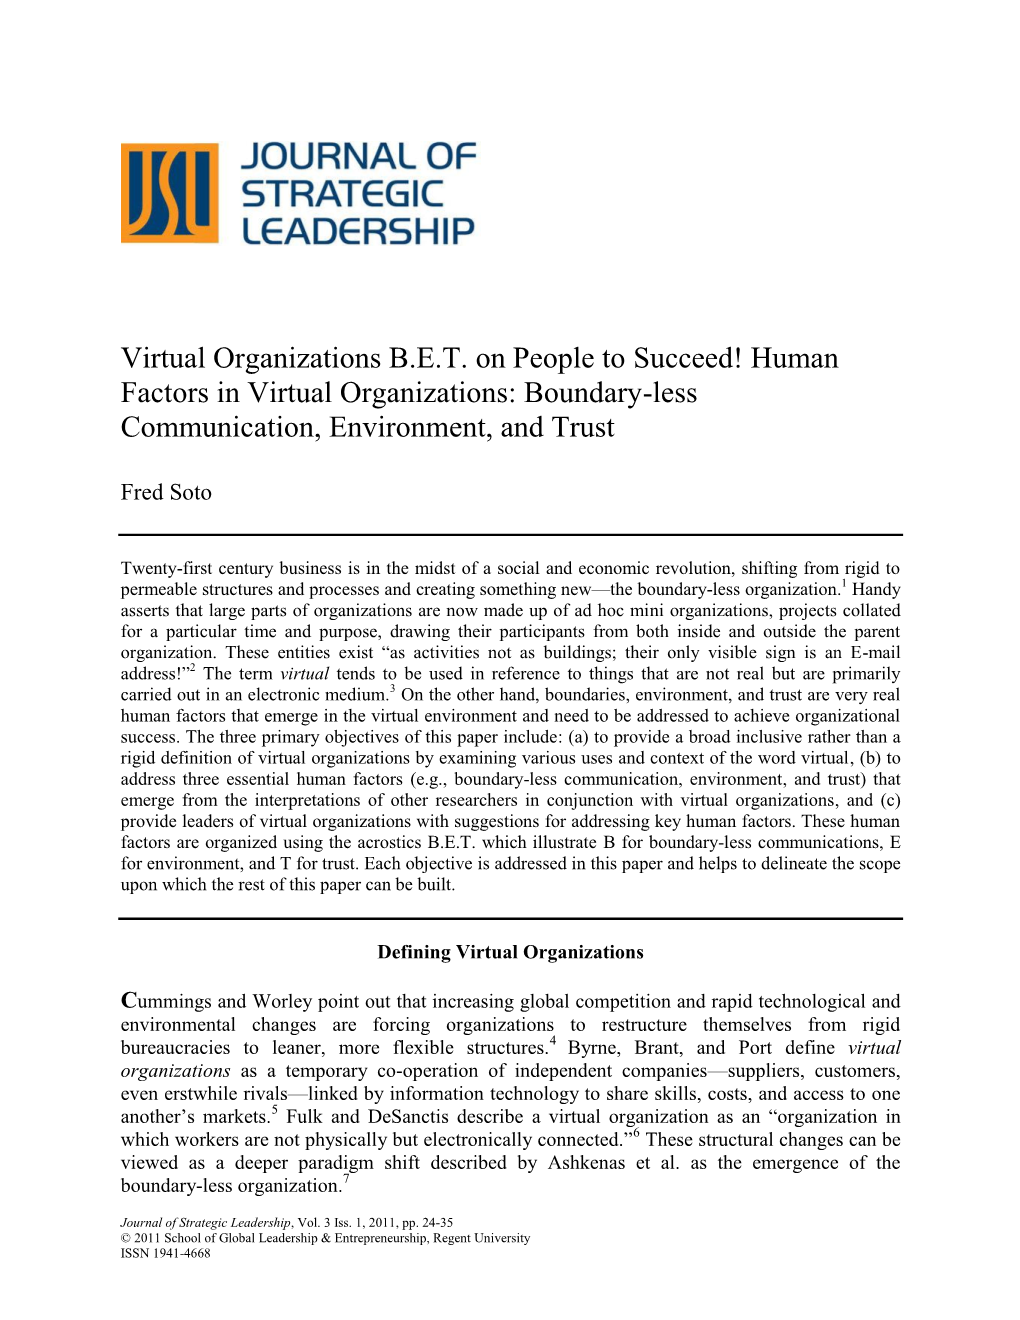 Virtual Organizations B.E.T. on People to Succeed! Human Factors in Virtual Organizations: Boundary-Less Communication, Environment, and Trust